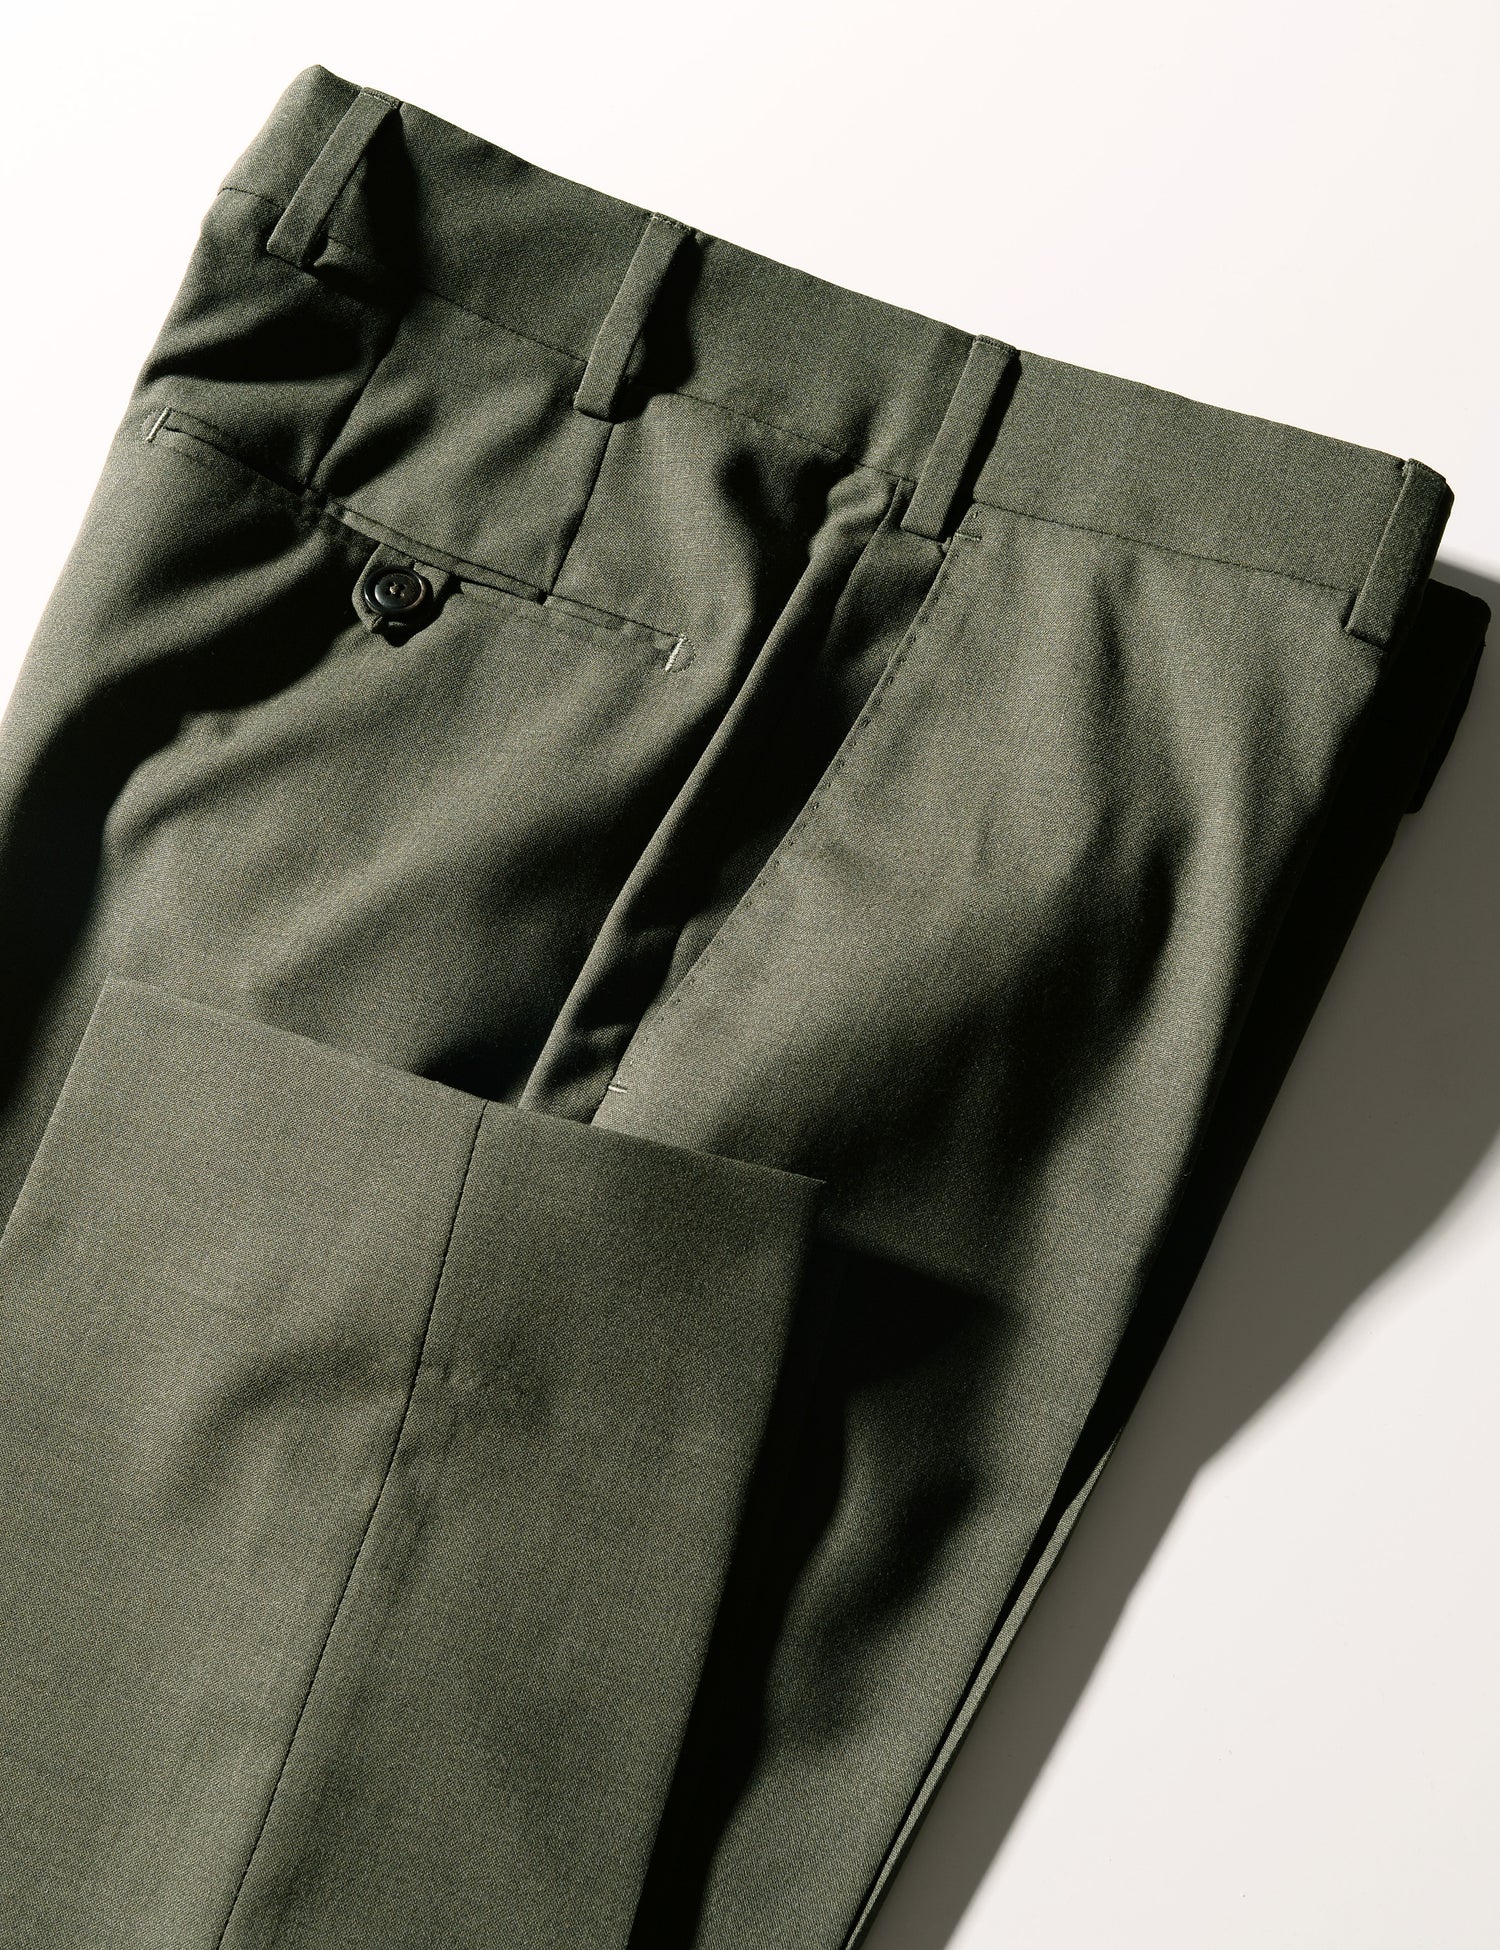 Detail shot of Brooklyn Tailors BKT50 Tailored Trousers in 14.5 Micron Mouliné - Agave Green showing cuff, back pocket, side pocket and waistband